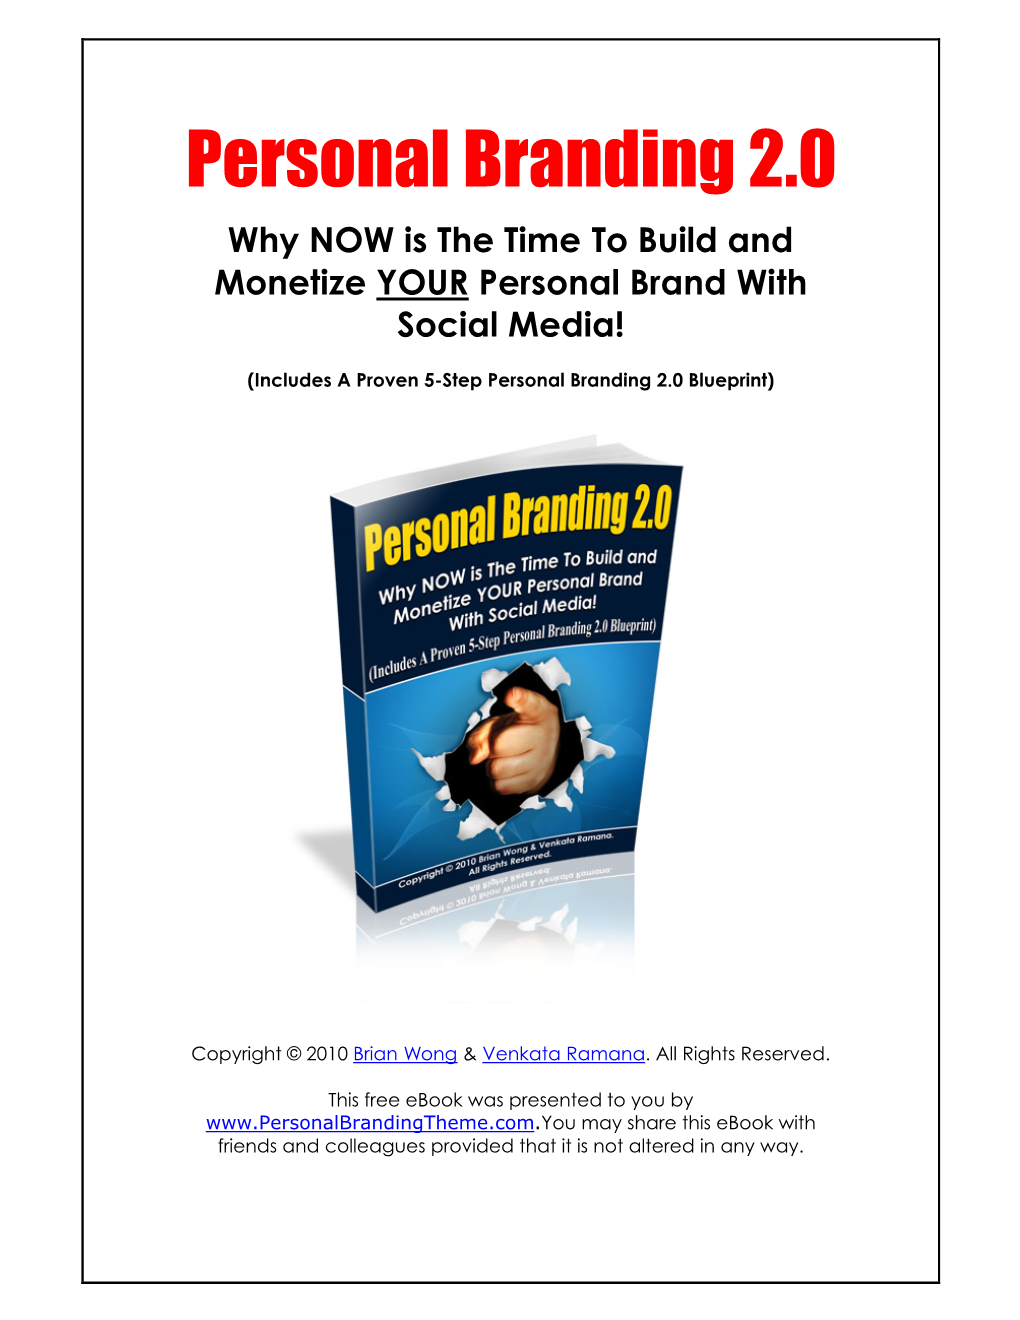 Personal Branding 2.0 Why NOW Is the Time to Build and Monetize YOUR Personal Brand with Social Media!